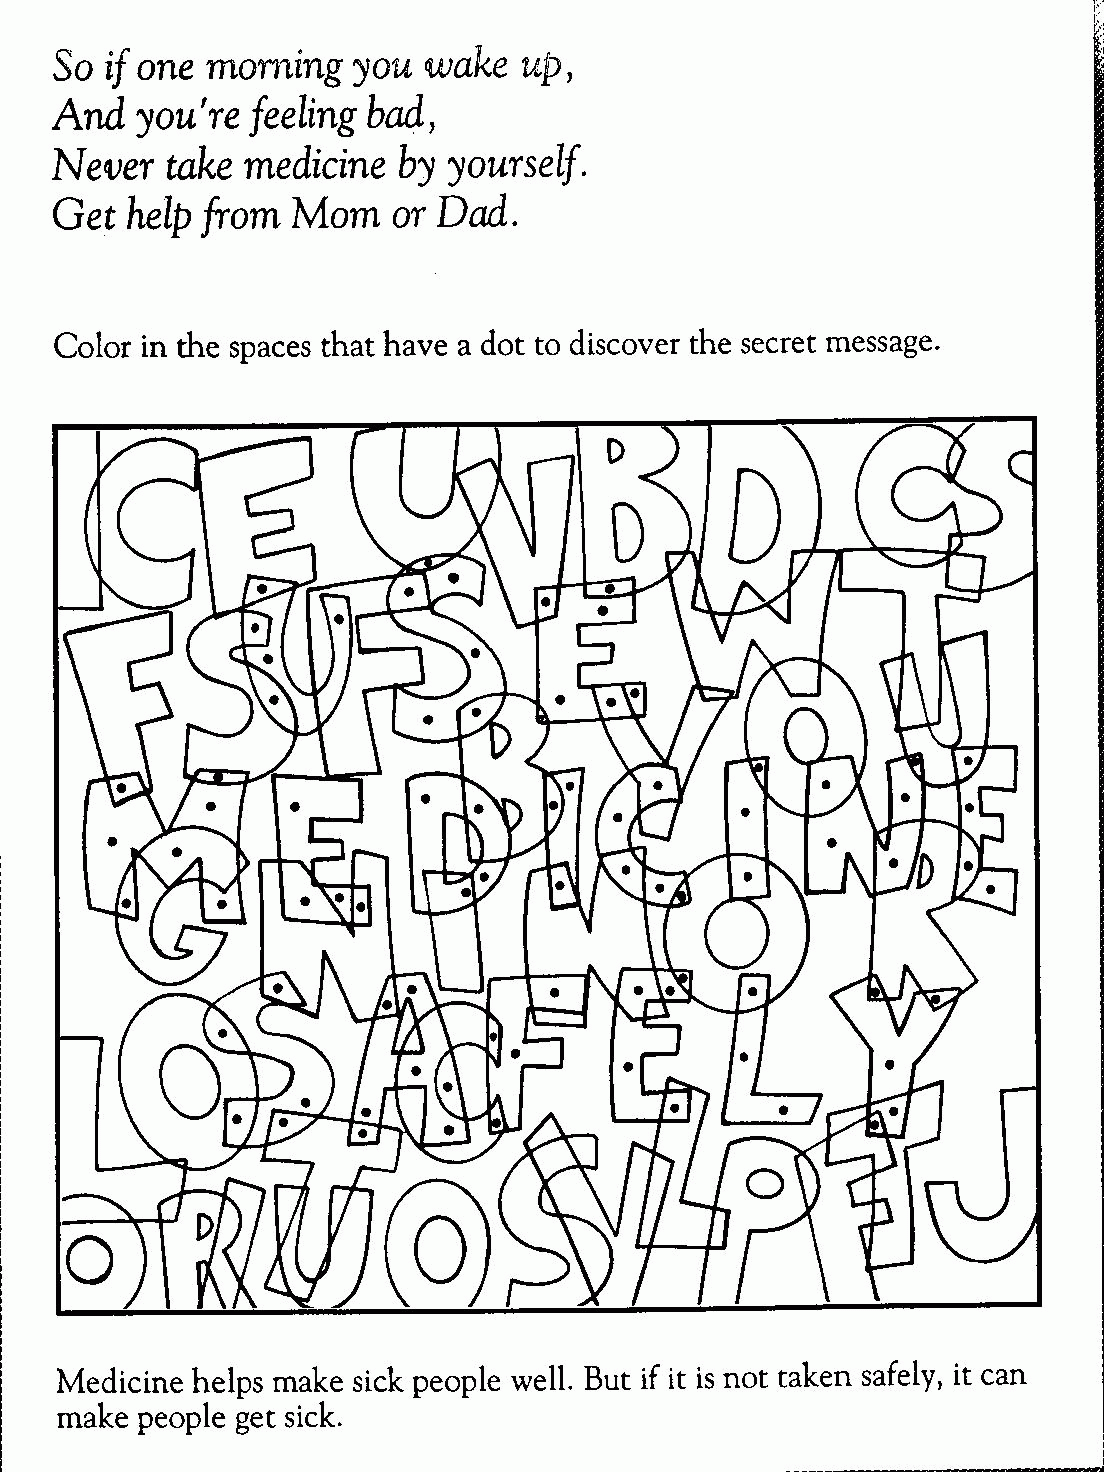 Red Ribbon Week Coloring Page Free. Only Coloring Page Coloring Home